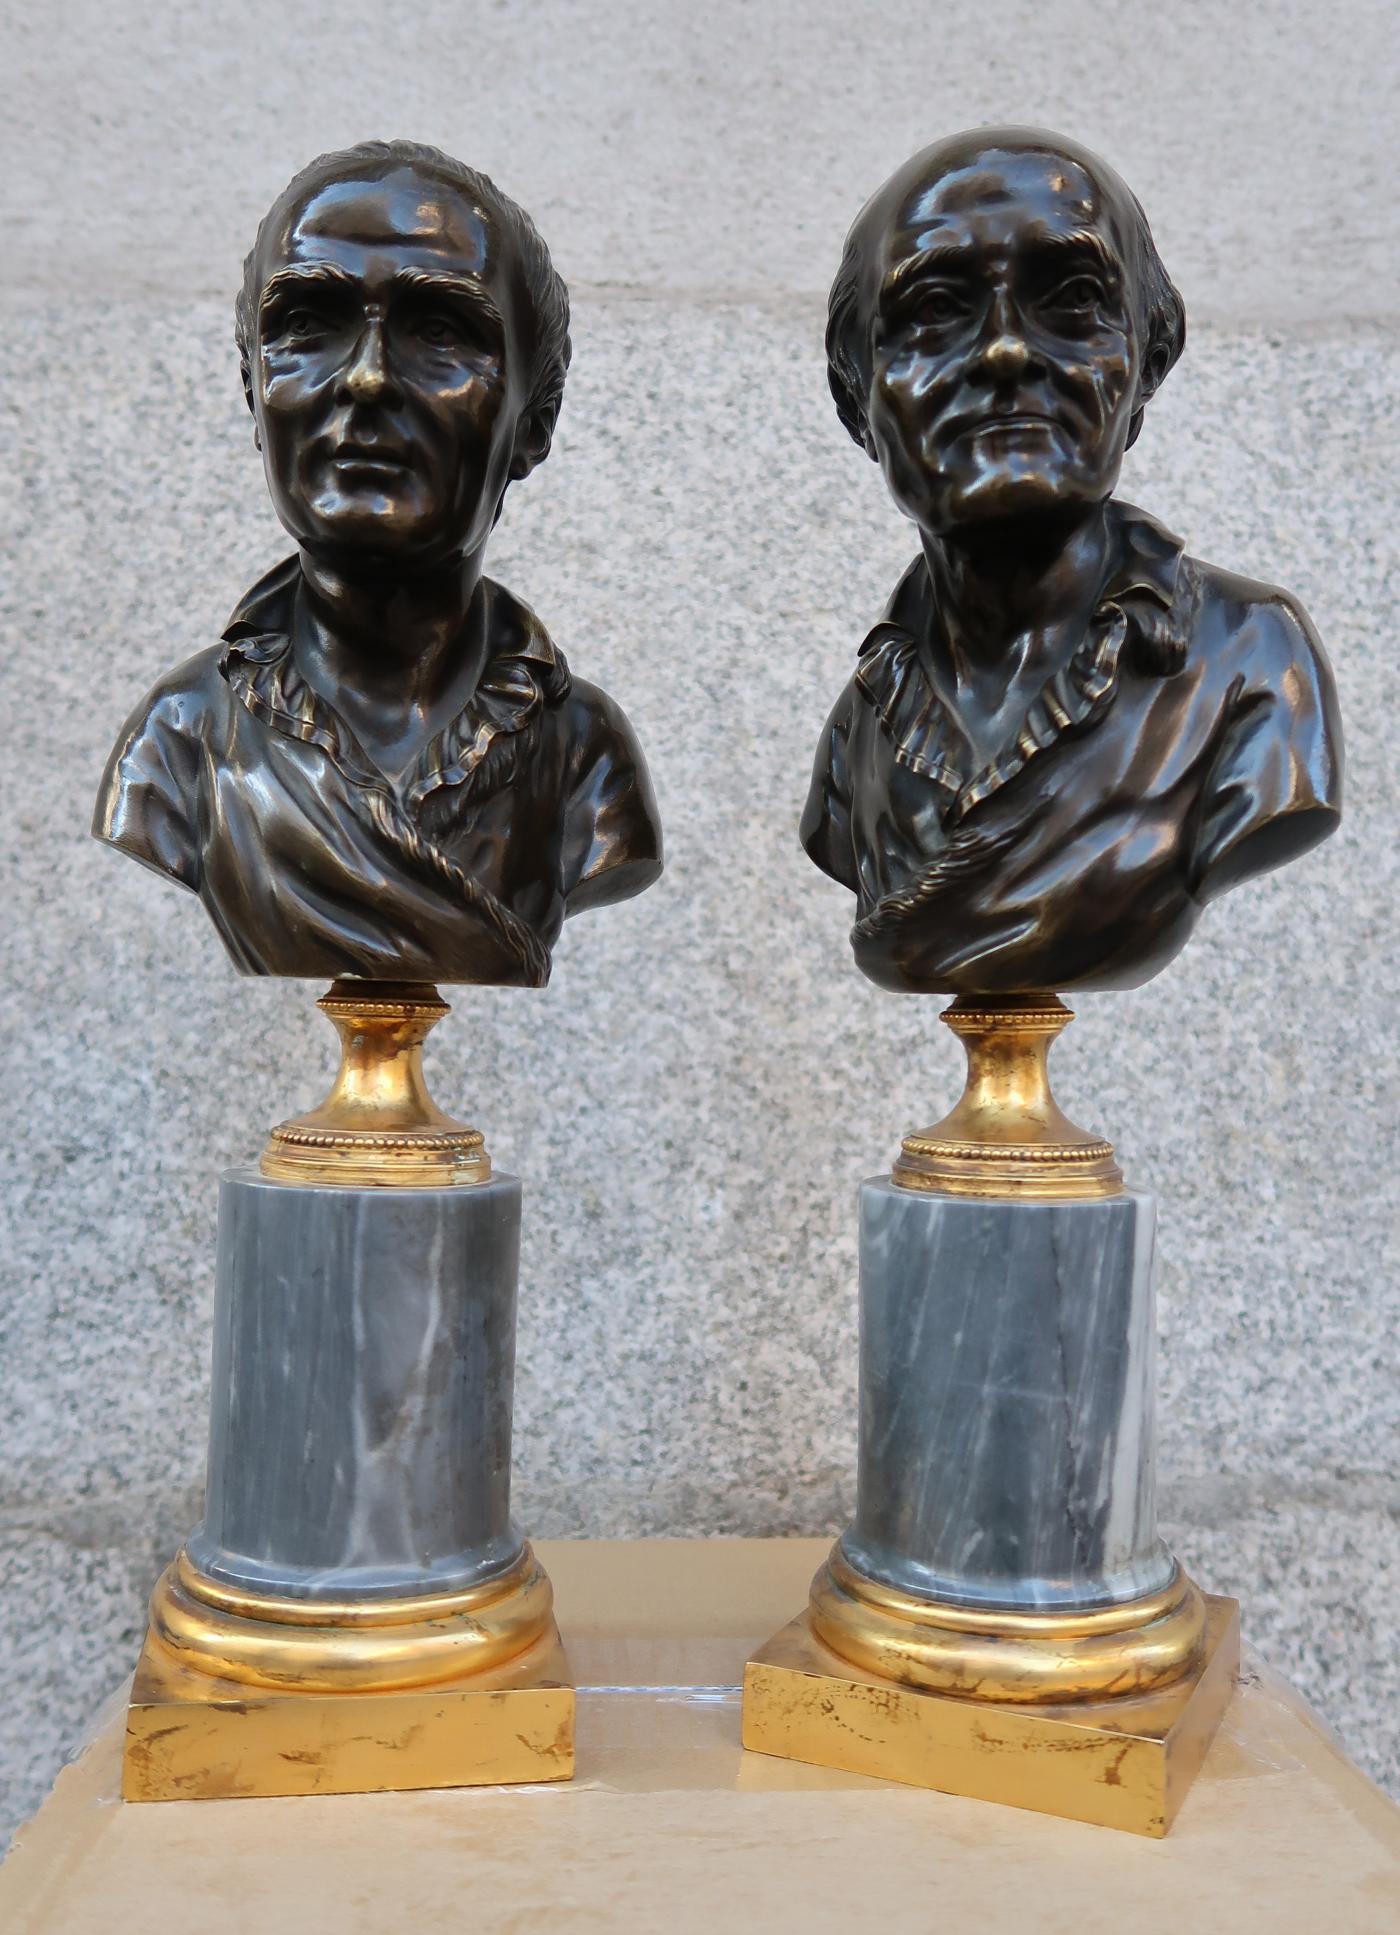 A pair of bronze and grey marble Louis XVI period busts, France 18th century. Perfect condition.